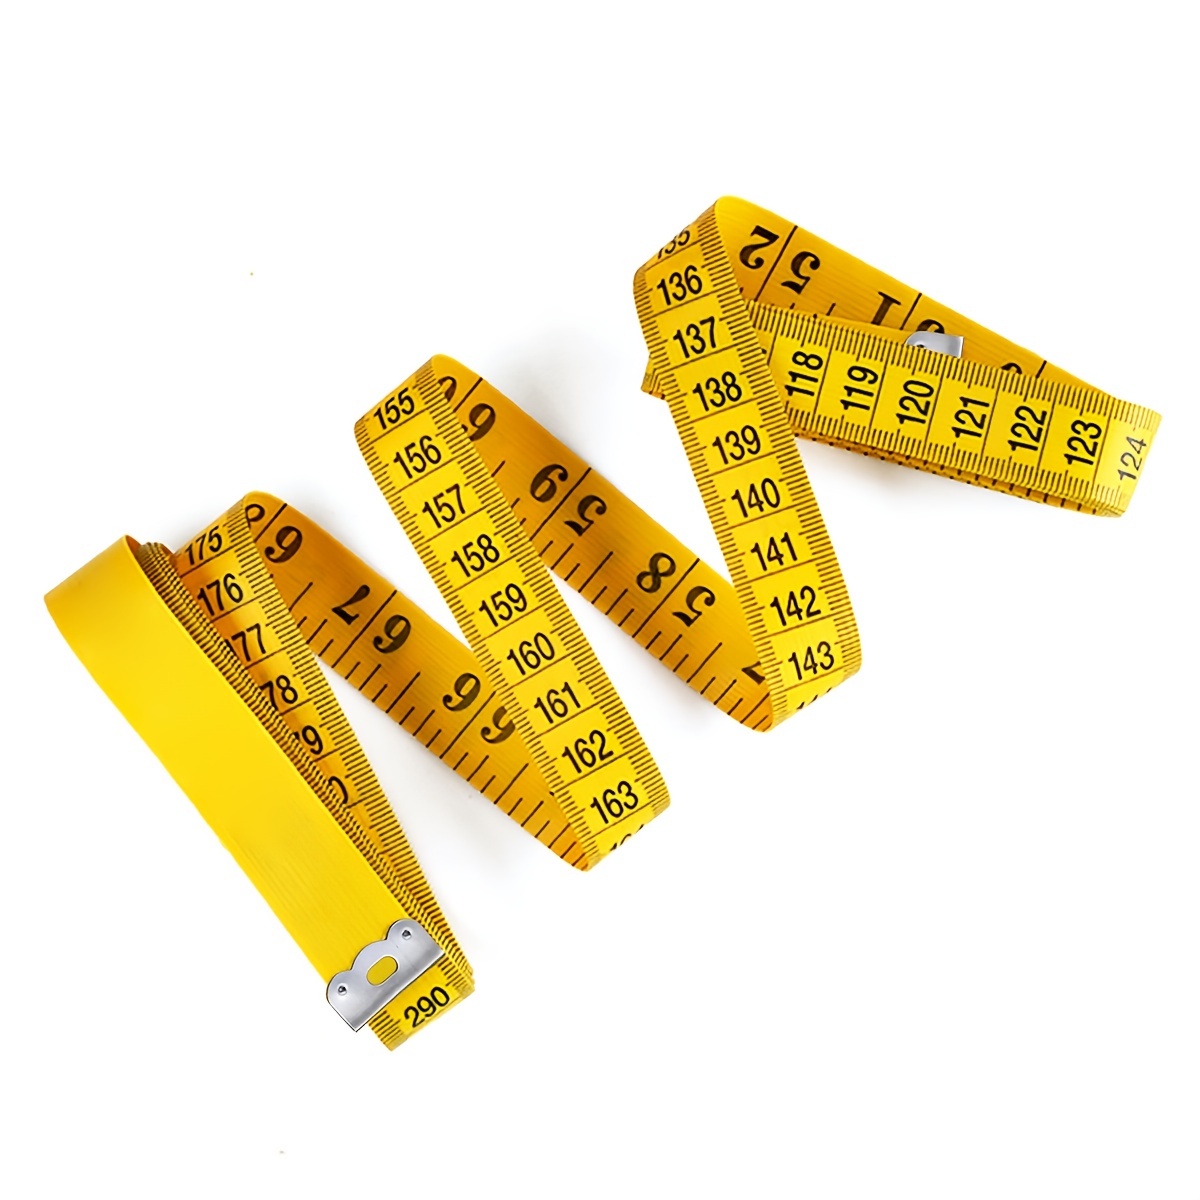 Measuring Sewing Accessories, Body Measurement Tape, Craft Ruler